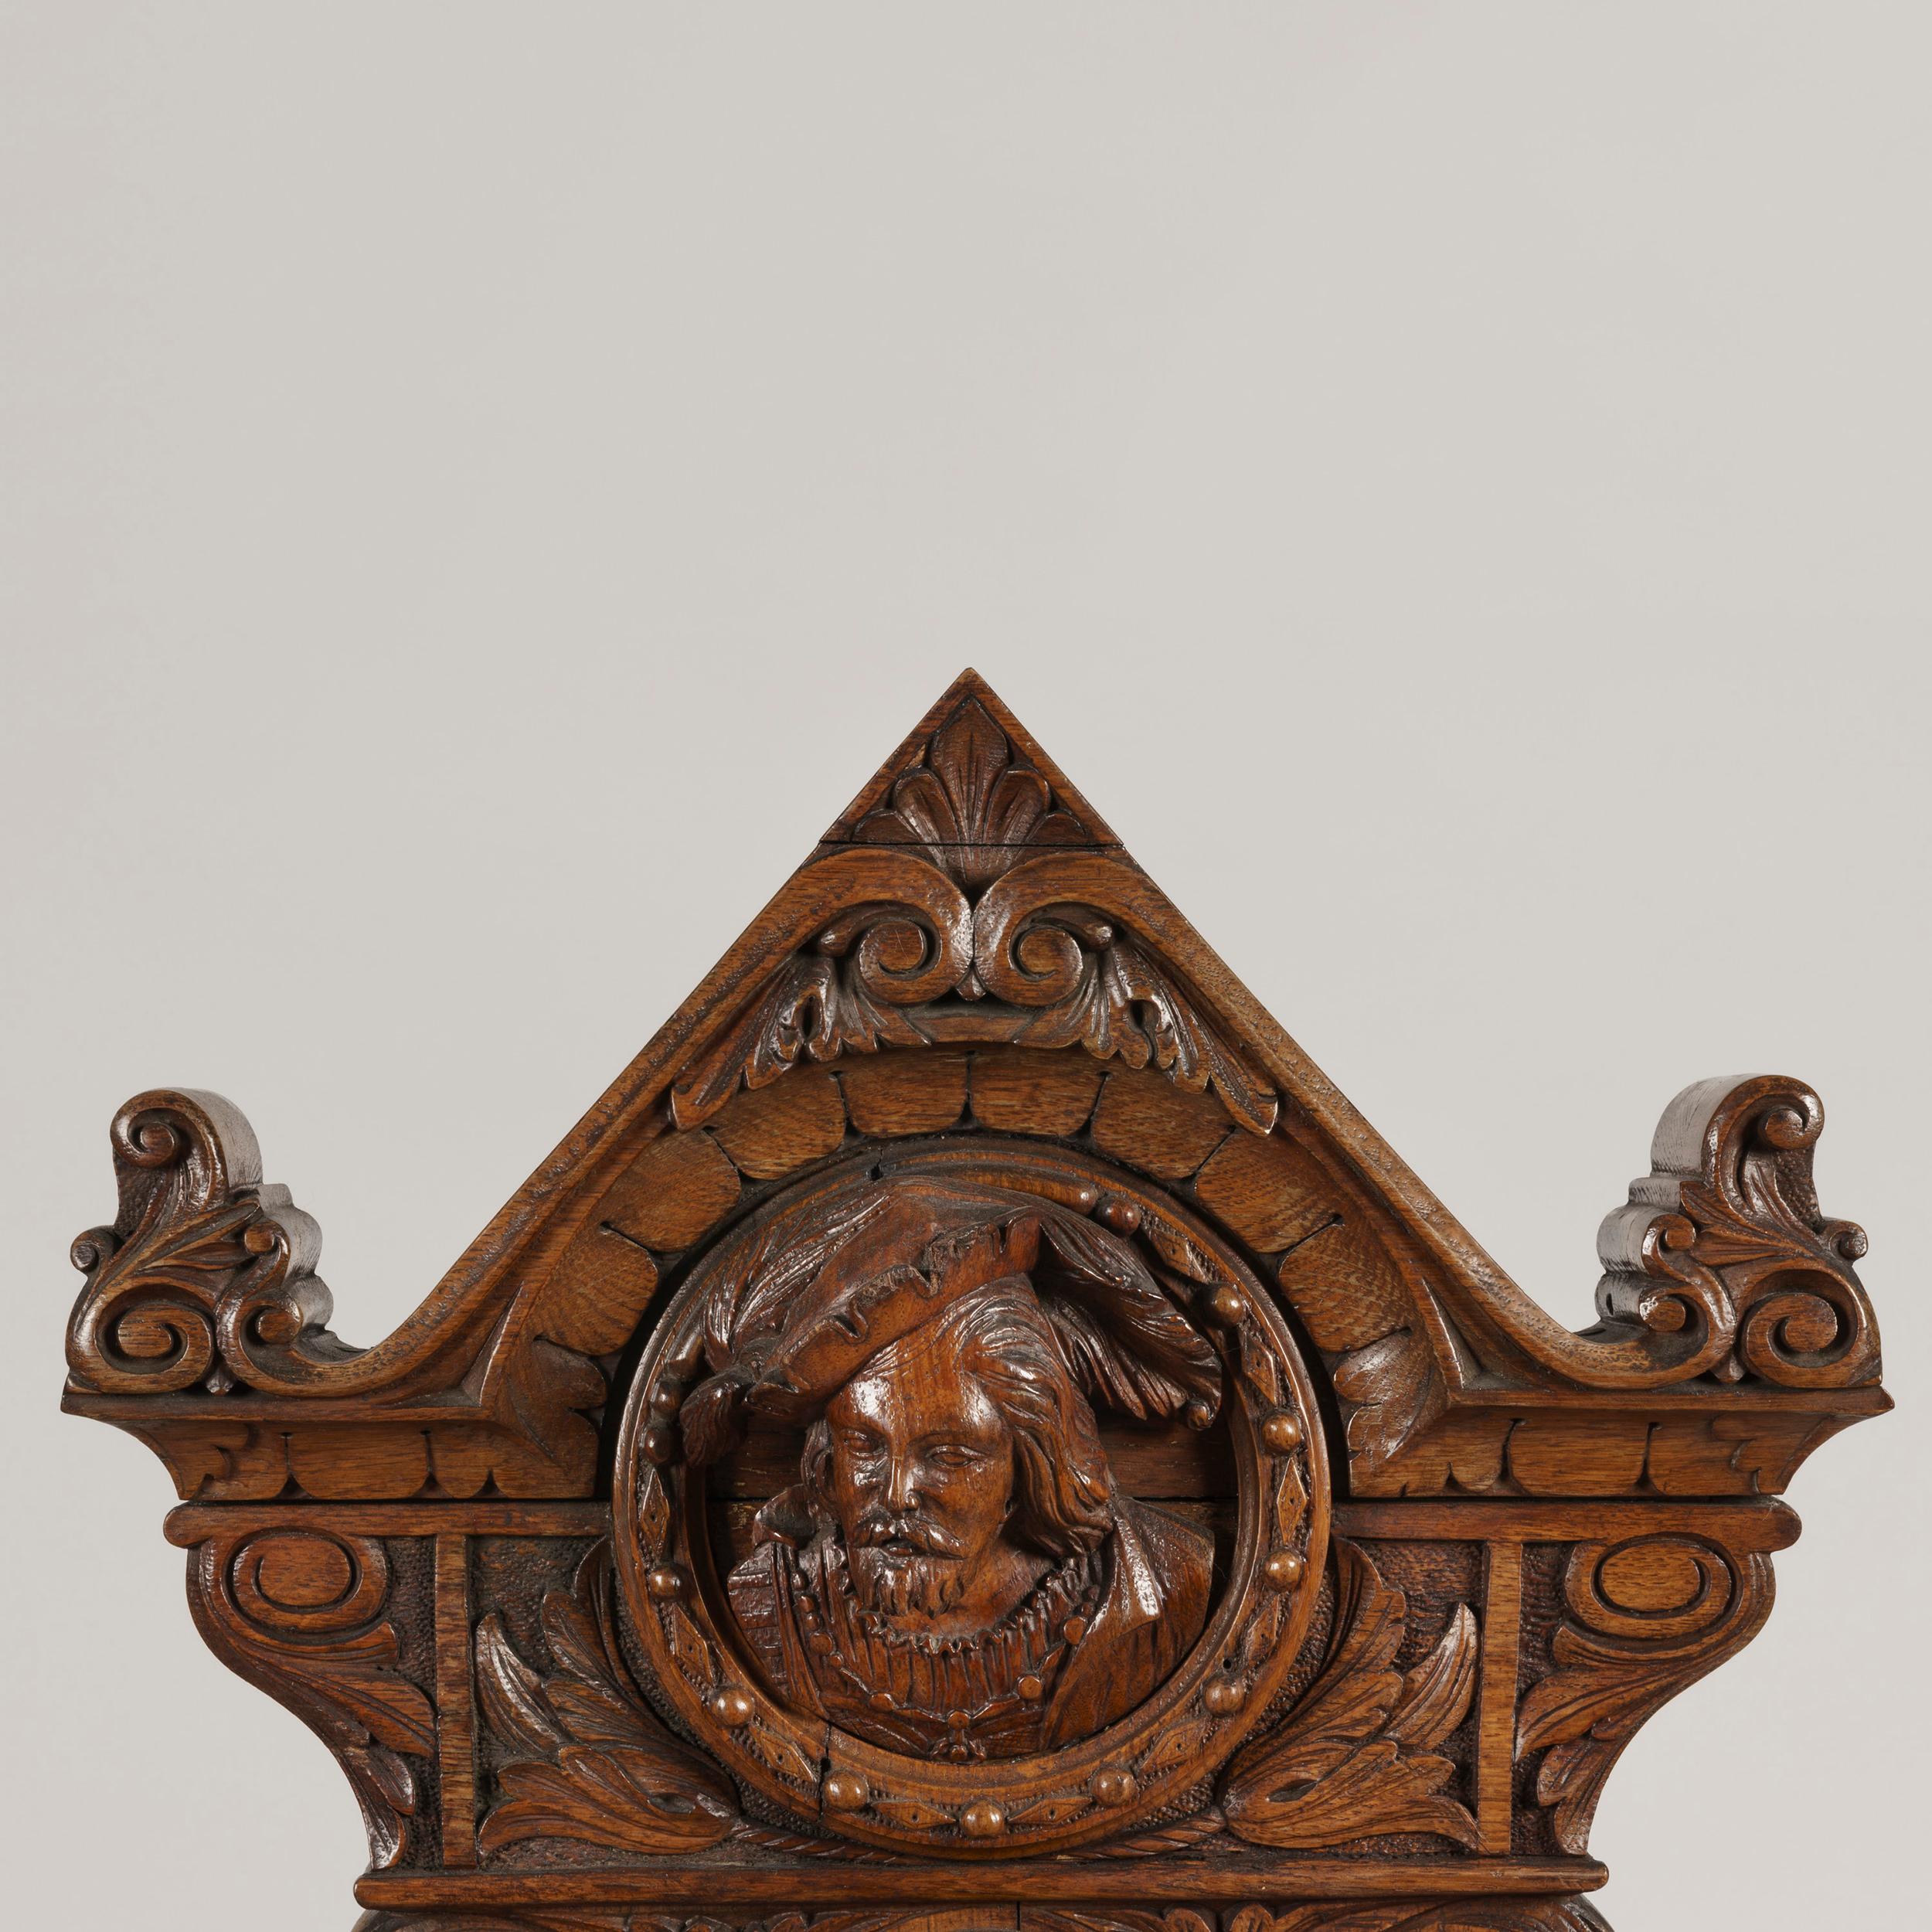 The barometer, of aneroid type, signed by the maker and having a thermometer above is house within an extensively carved 'banjo' form case, incorporating fruits and foliates, with a bust of a hatted man from the Troubadour period. Inscribed on the